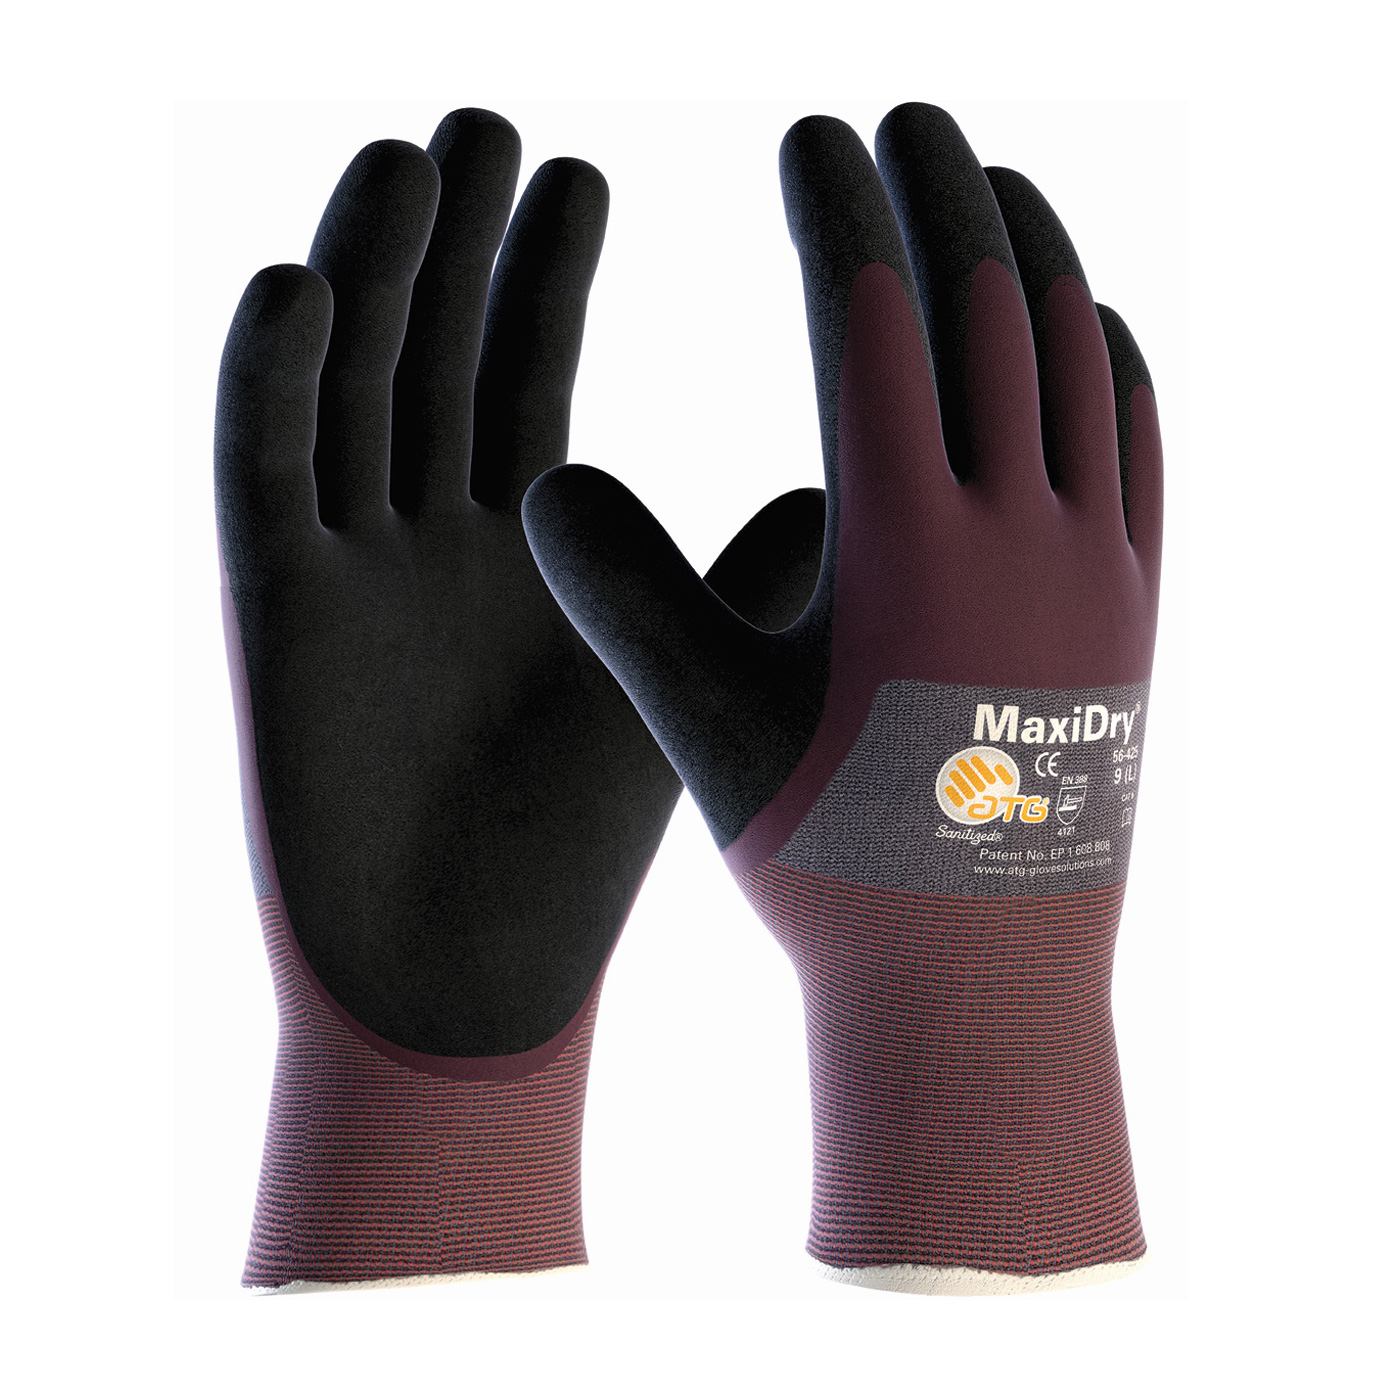 PIP 56-425/S MaxiDry Ultra Lightweight Nitrile Glove, Palm Dipped with Seamless Knit Nylon/Lycra Liner and Non-Slip Grip on Palm & Fingers - Small PID-56 425 S